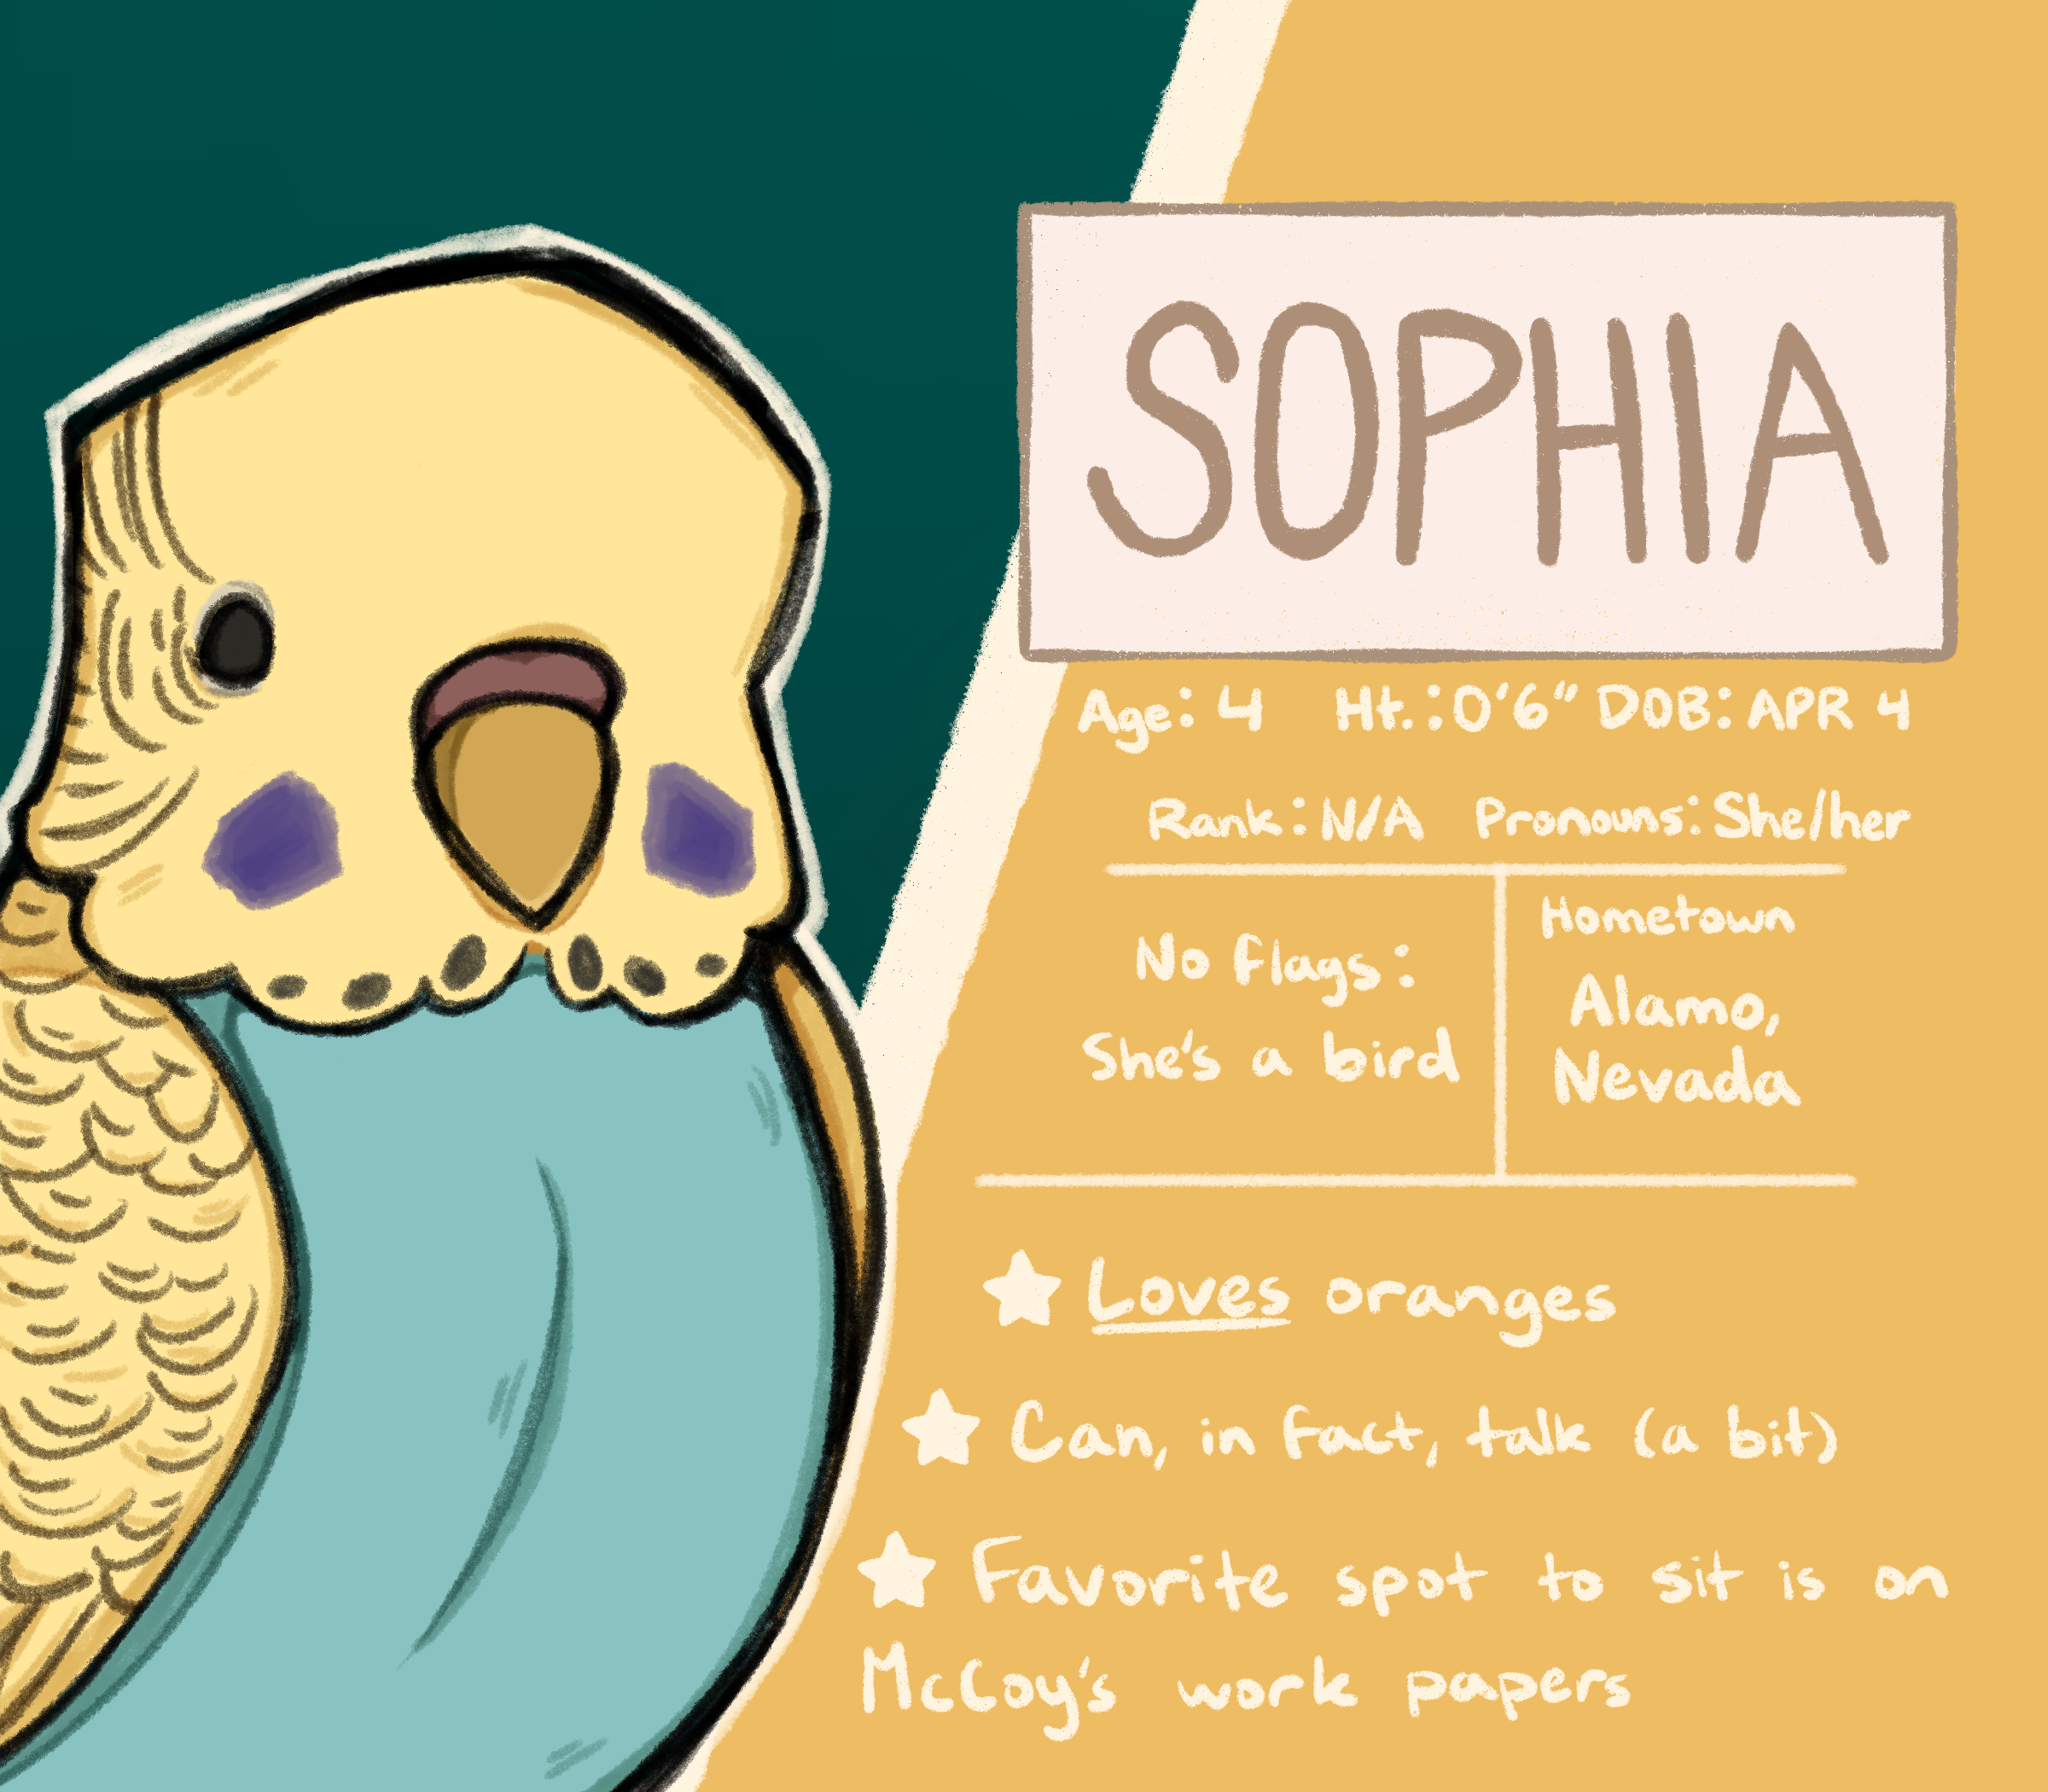 A character bio for Sophia. Age: 4, Height: 0'6, Date of Birth: April 4. Rank: N/A, Pronouns: She/her. Sophia is a budgie bird. Her hometown is Alamo, Nevada. Fun facts include: She loves oranges, she can, in fact, talk (a bit), and her favorite place to sit is on McCoy's work papers.